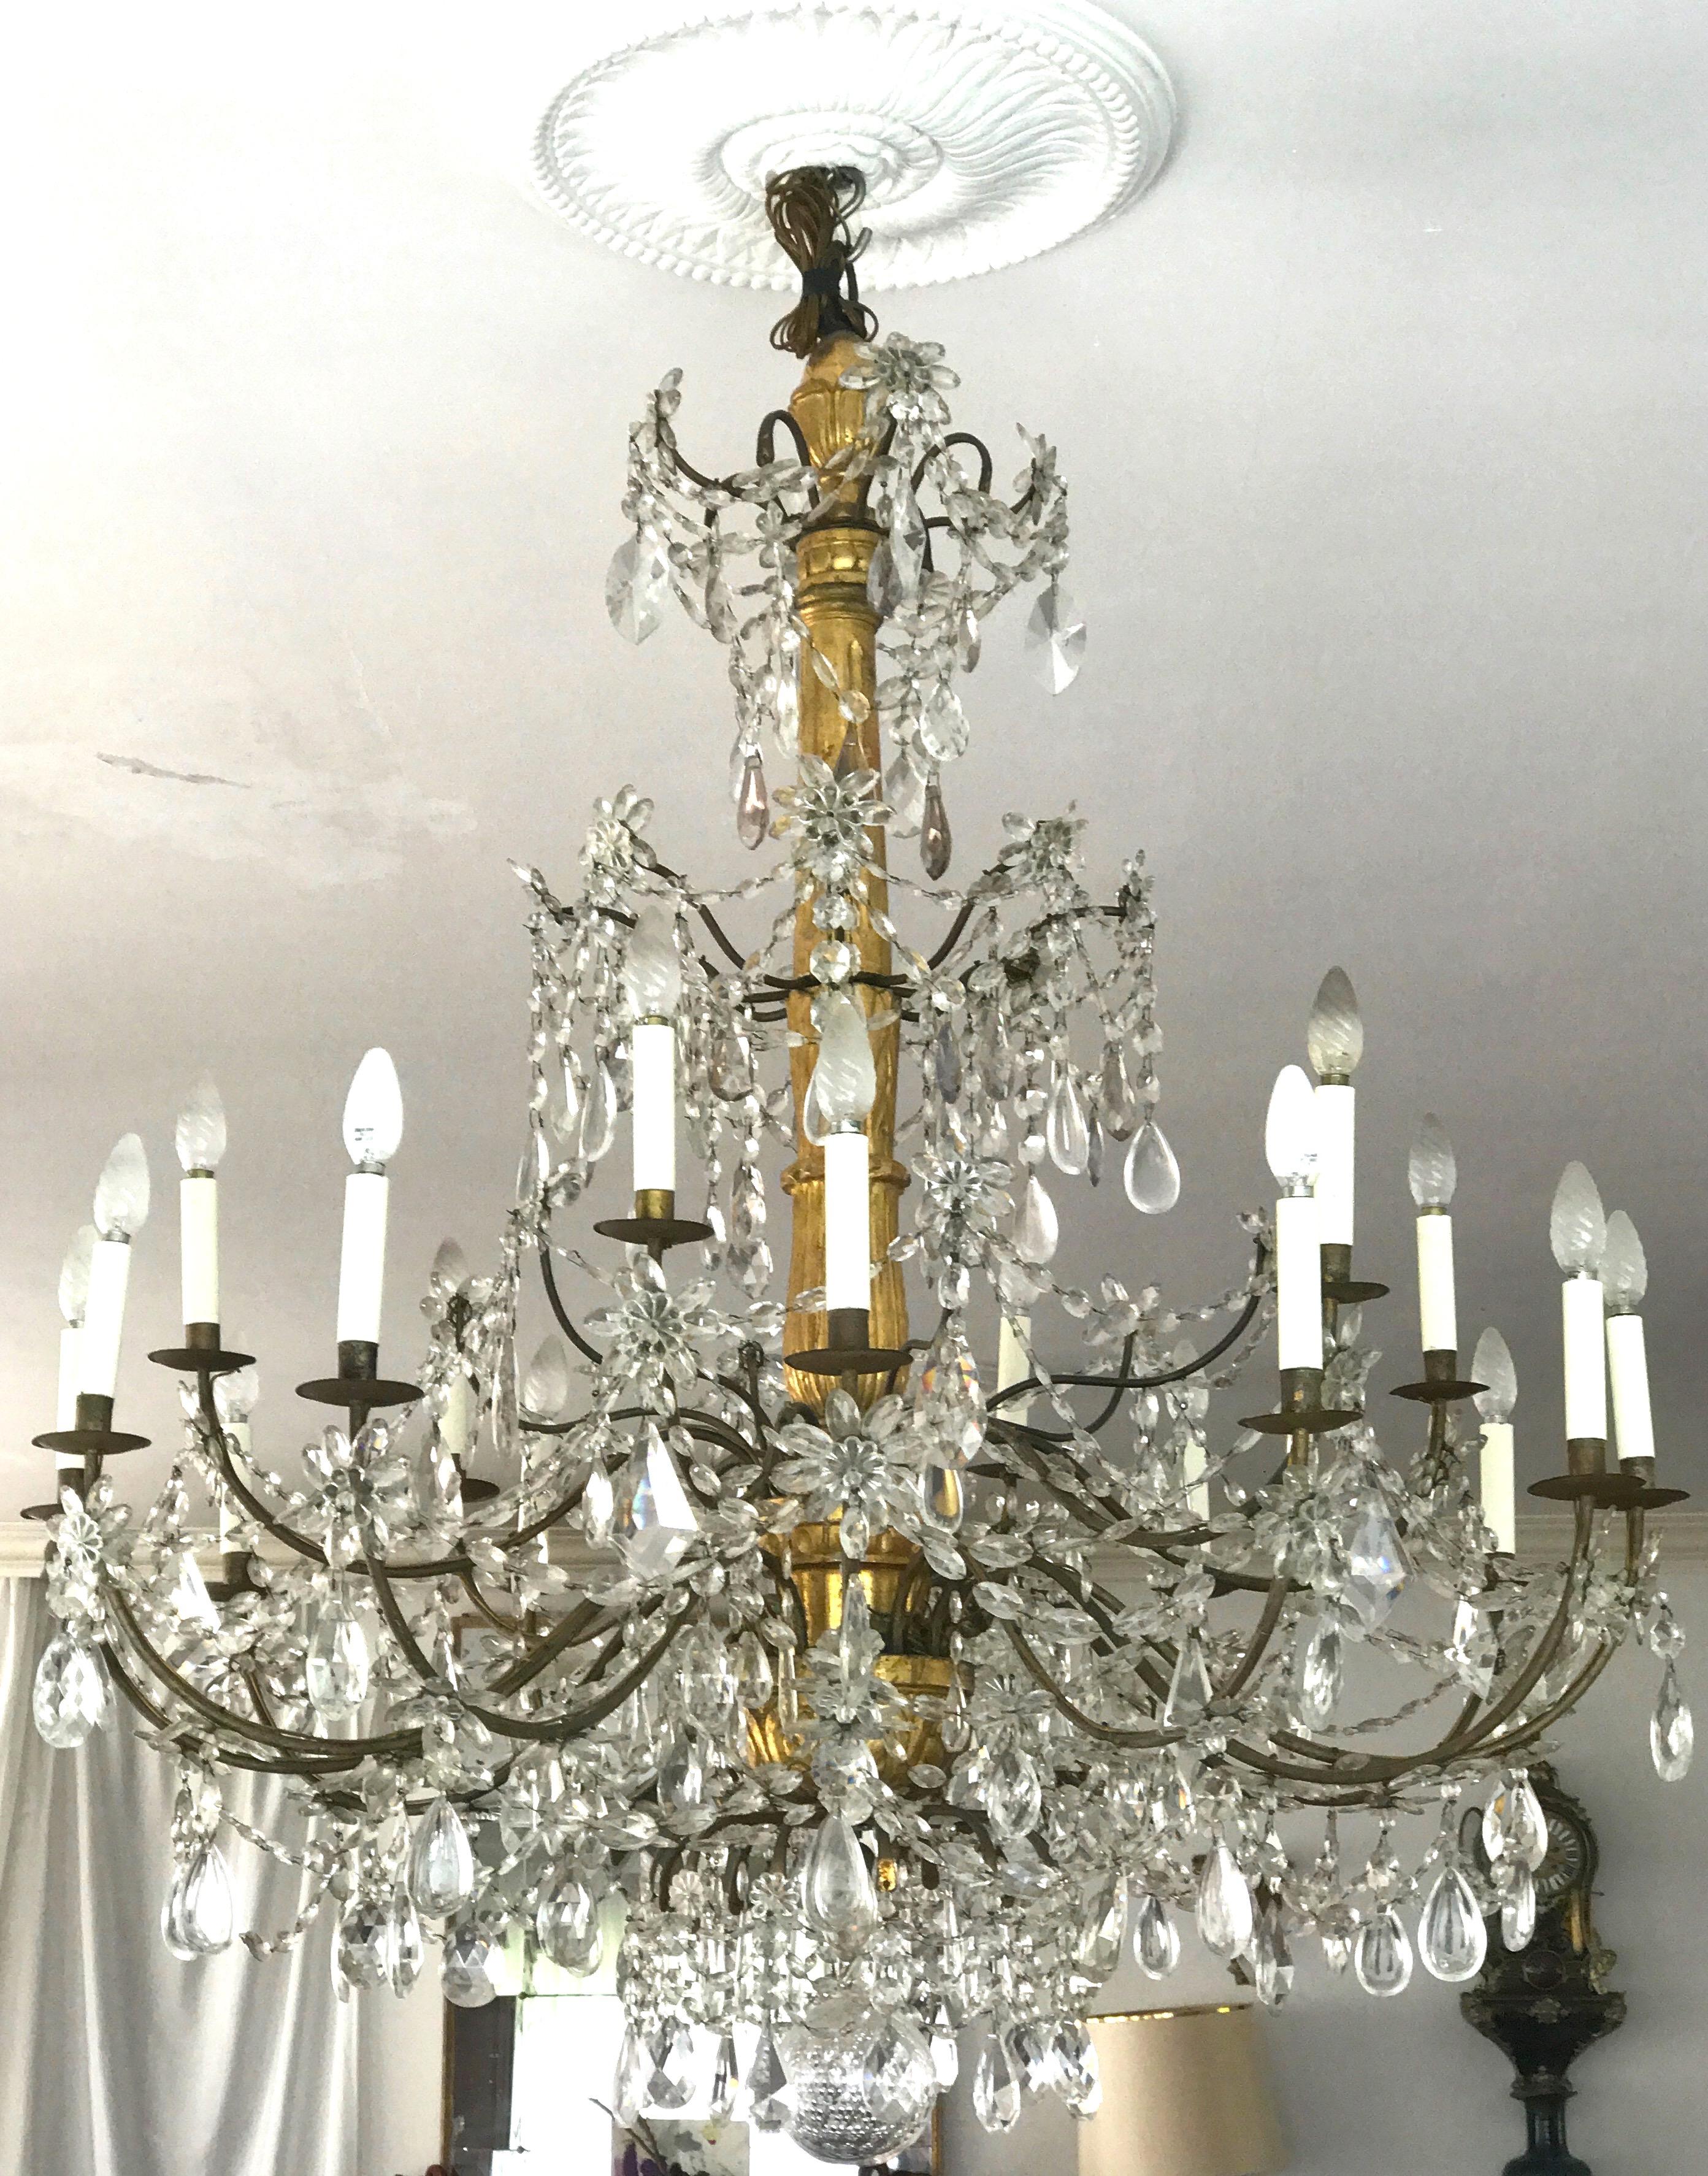 Italian Giltwood and Crystal Chandelier 18th Century Great Beauty 5